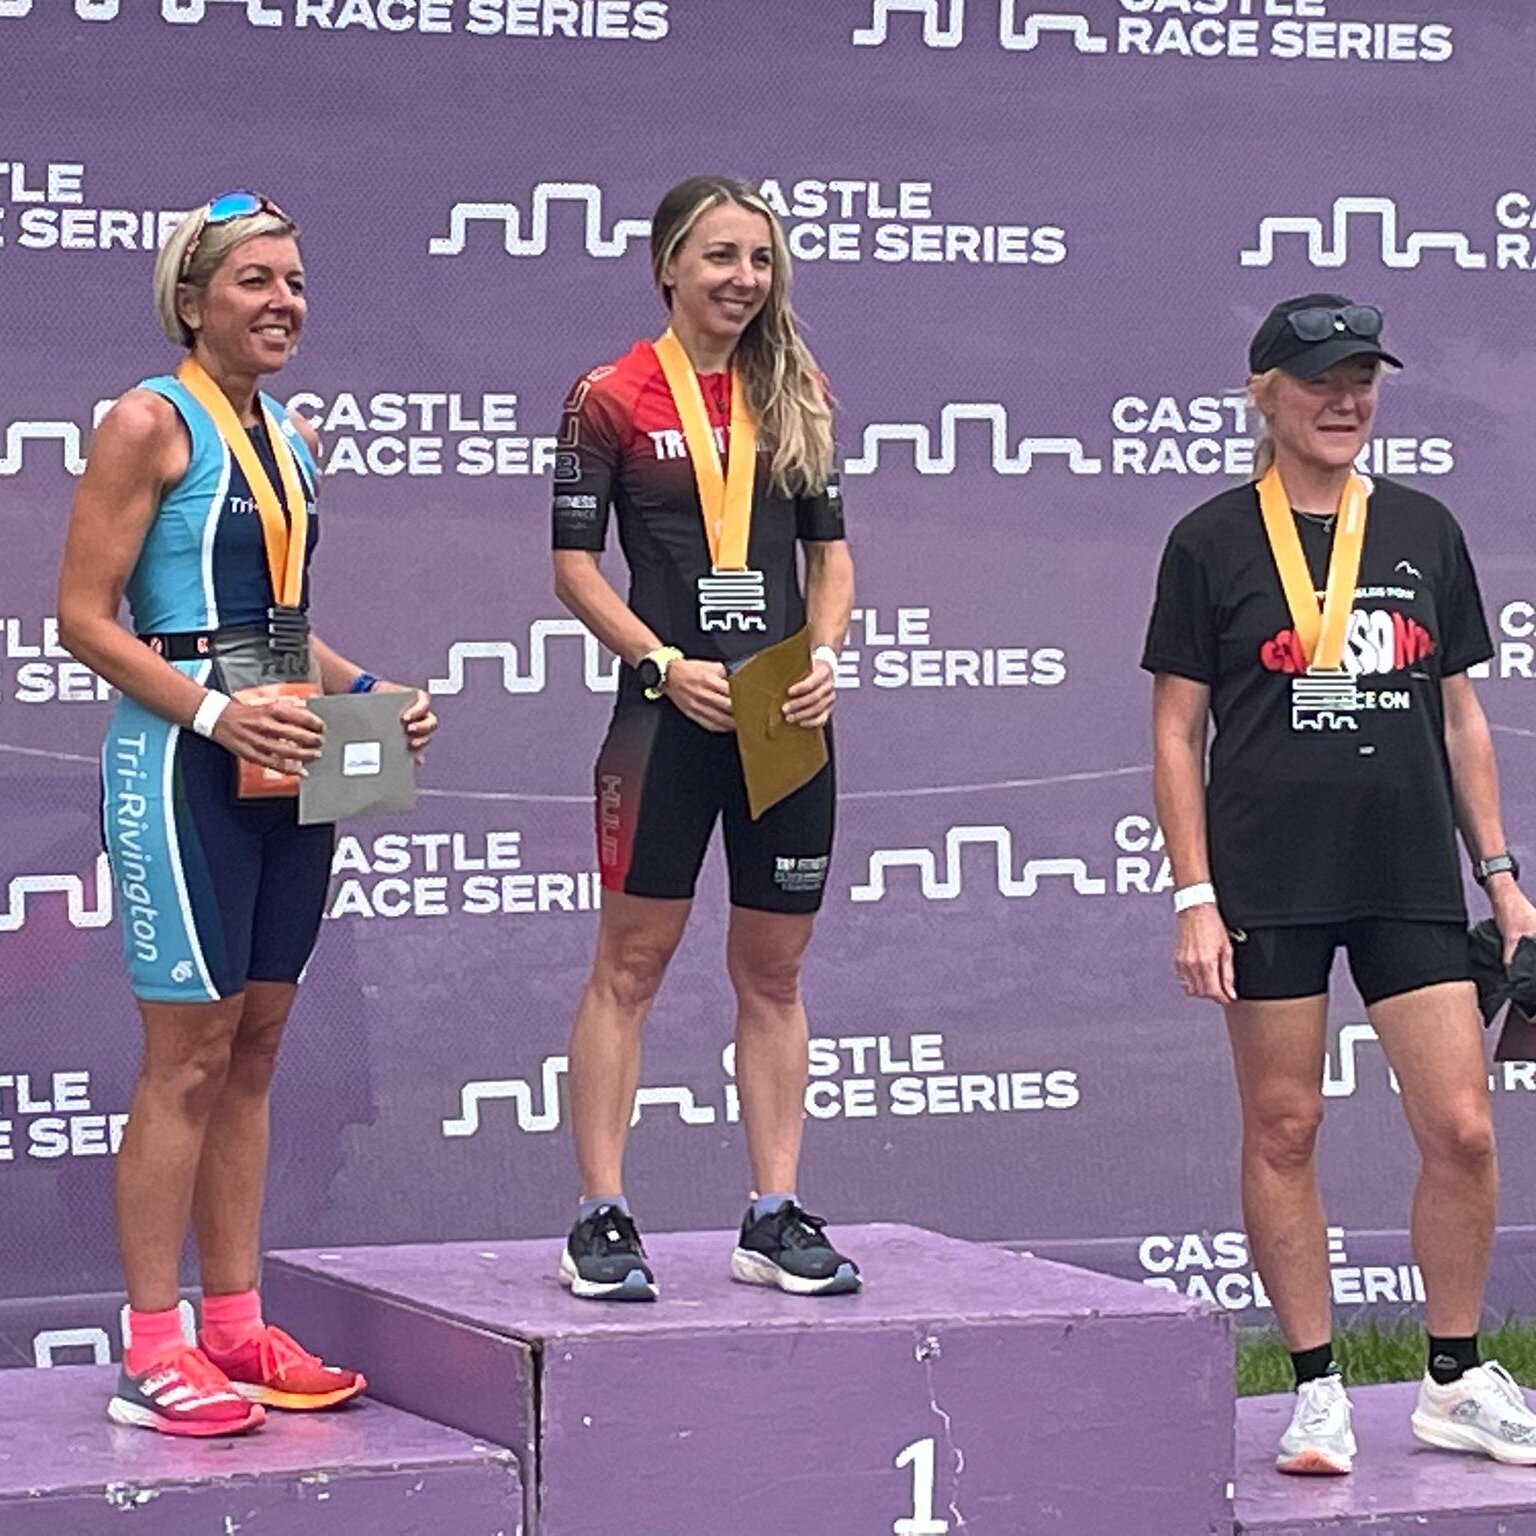 This Phenomenal athlete, Cat, has been a busy person at recent weekends. 

First off, taking 1st place in the Cholmondey Castle Sprint Duathlon. Having already represented GB this year, Cat is undoubtedly finding her feet in Duathlons. Cat came 8th o